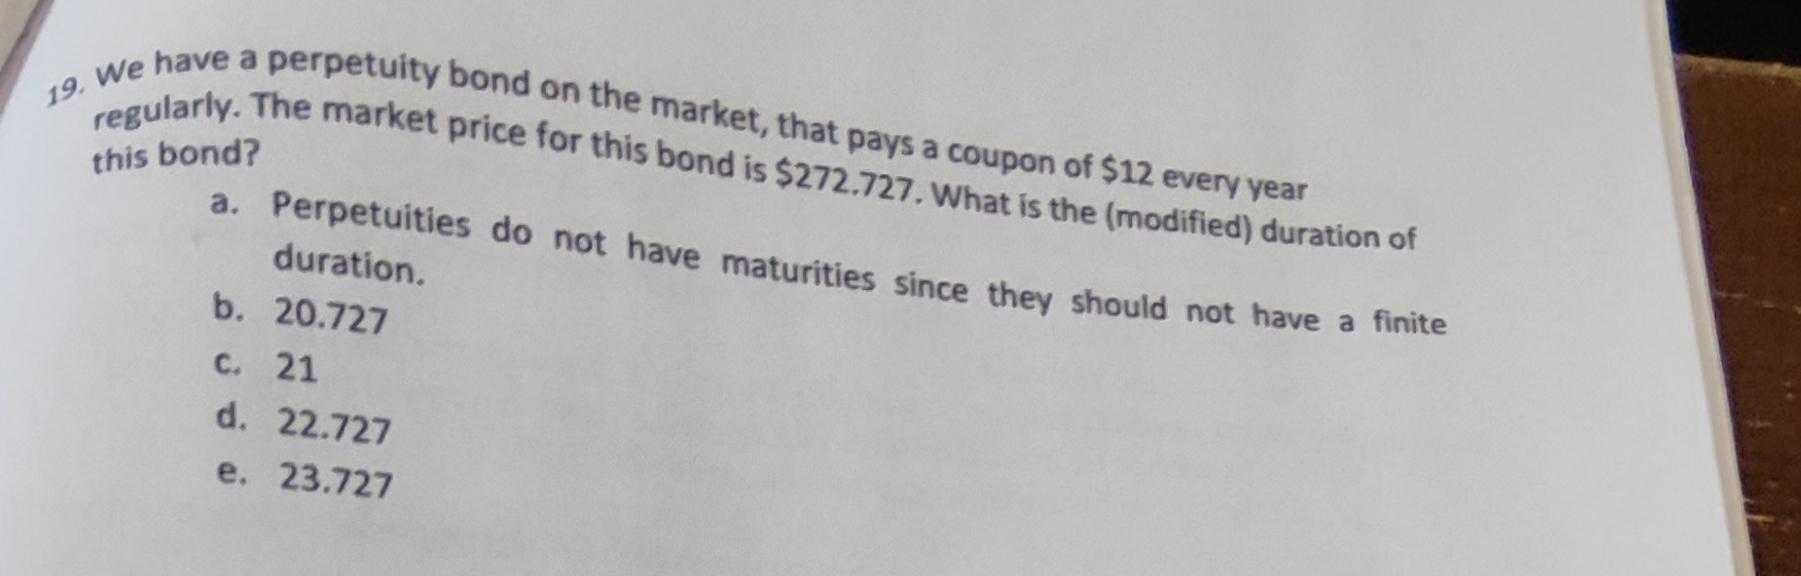 19. We have a perpetuity bond on the market, that pays a coupon of $12 every year regularly. The market price